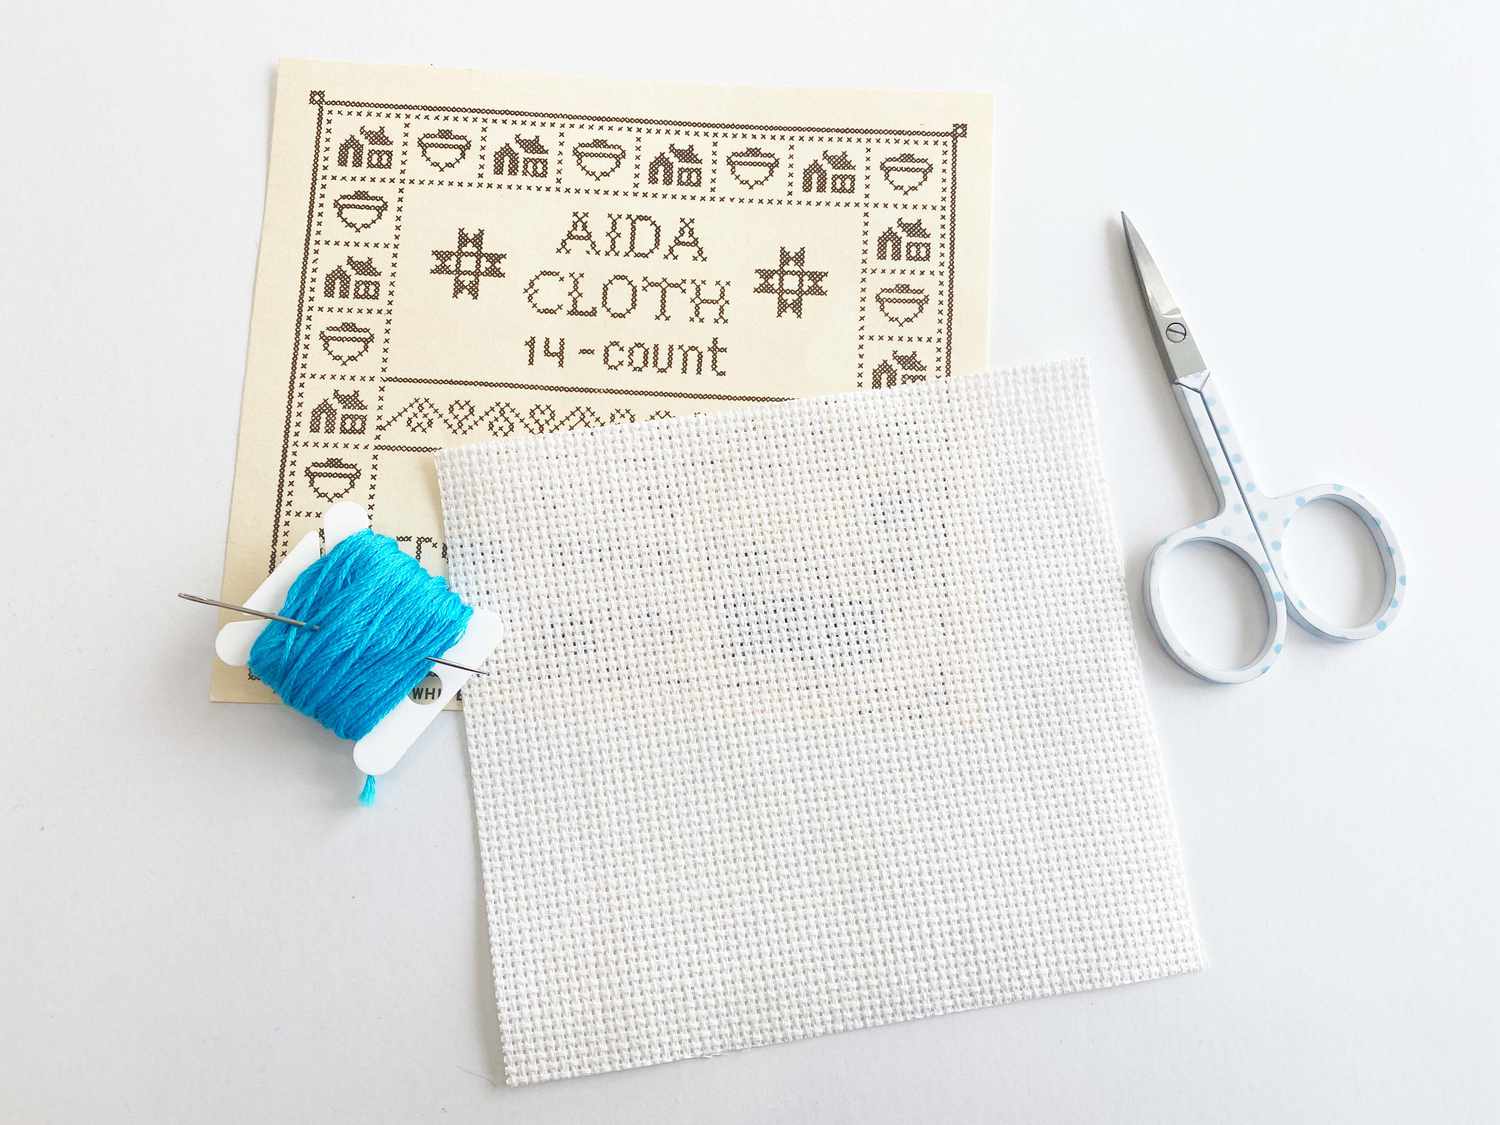 Aida cloth, thread, scissors, and a needle laying on a table